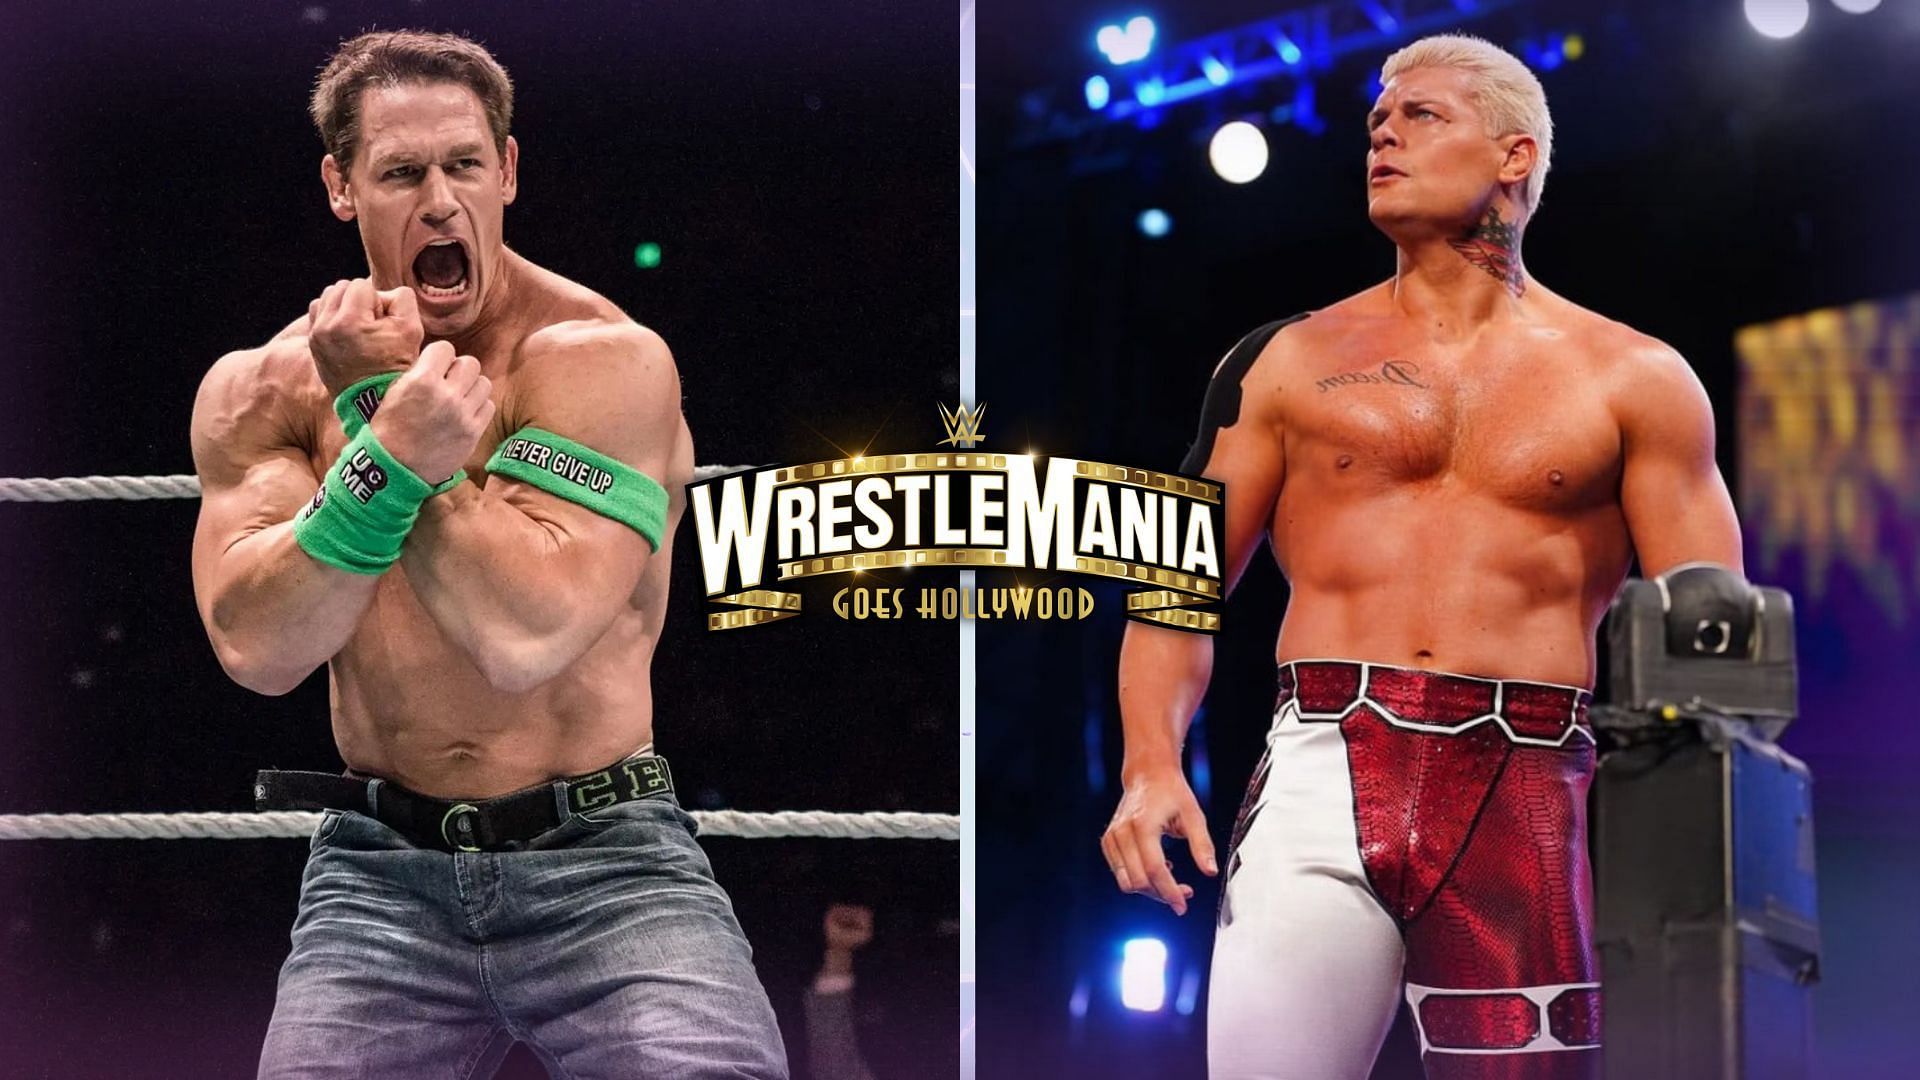 John Cena and Cody Rhodes were allegedly pitched to fight at WWE WrestleMania